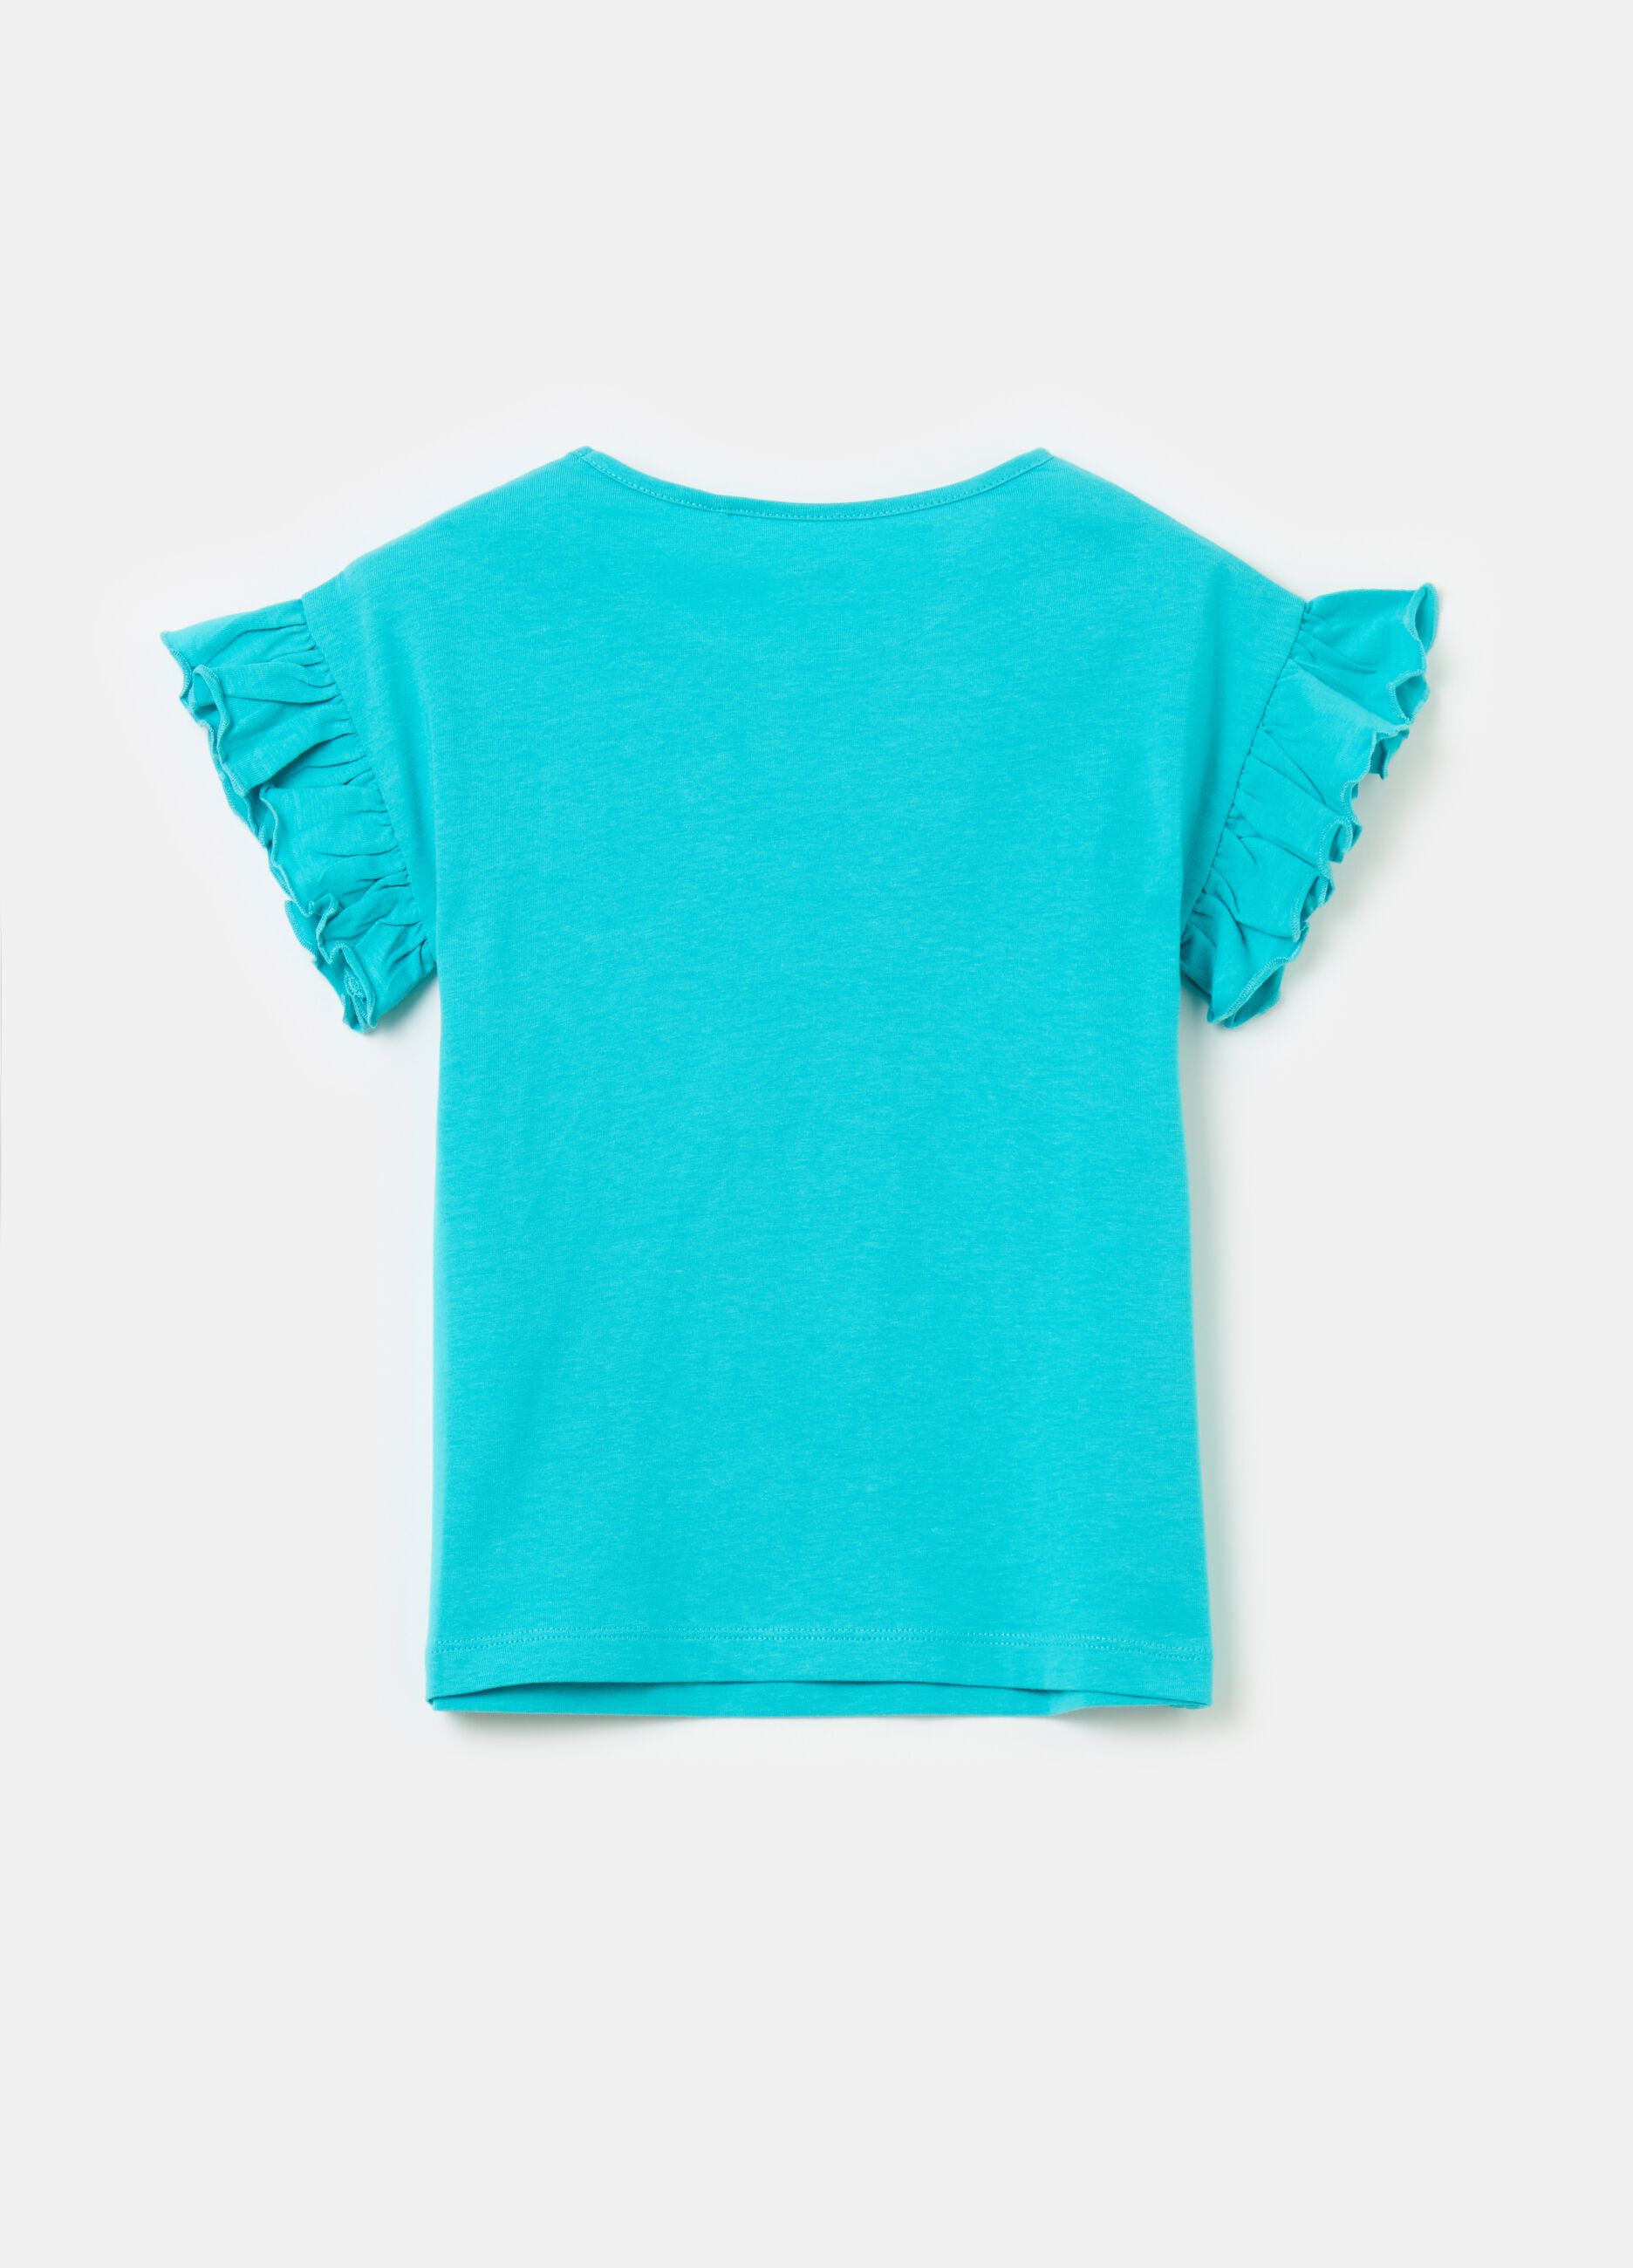 Cotton T-shirt with small pocket and frills